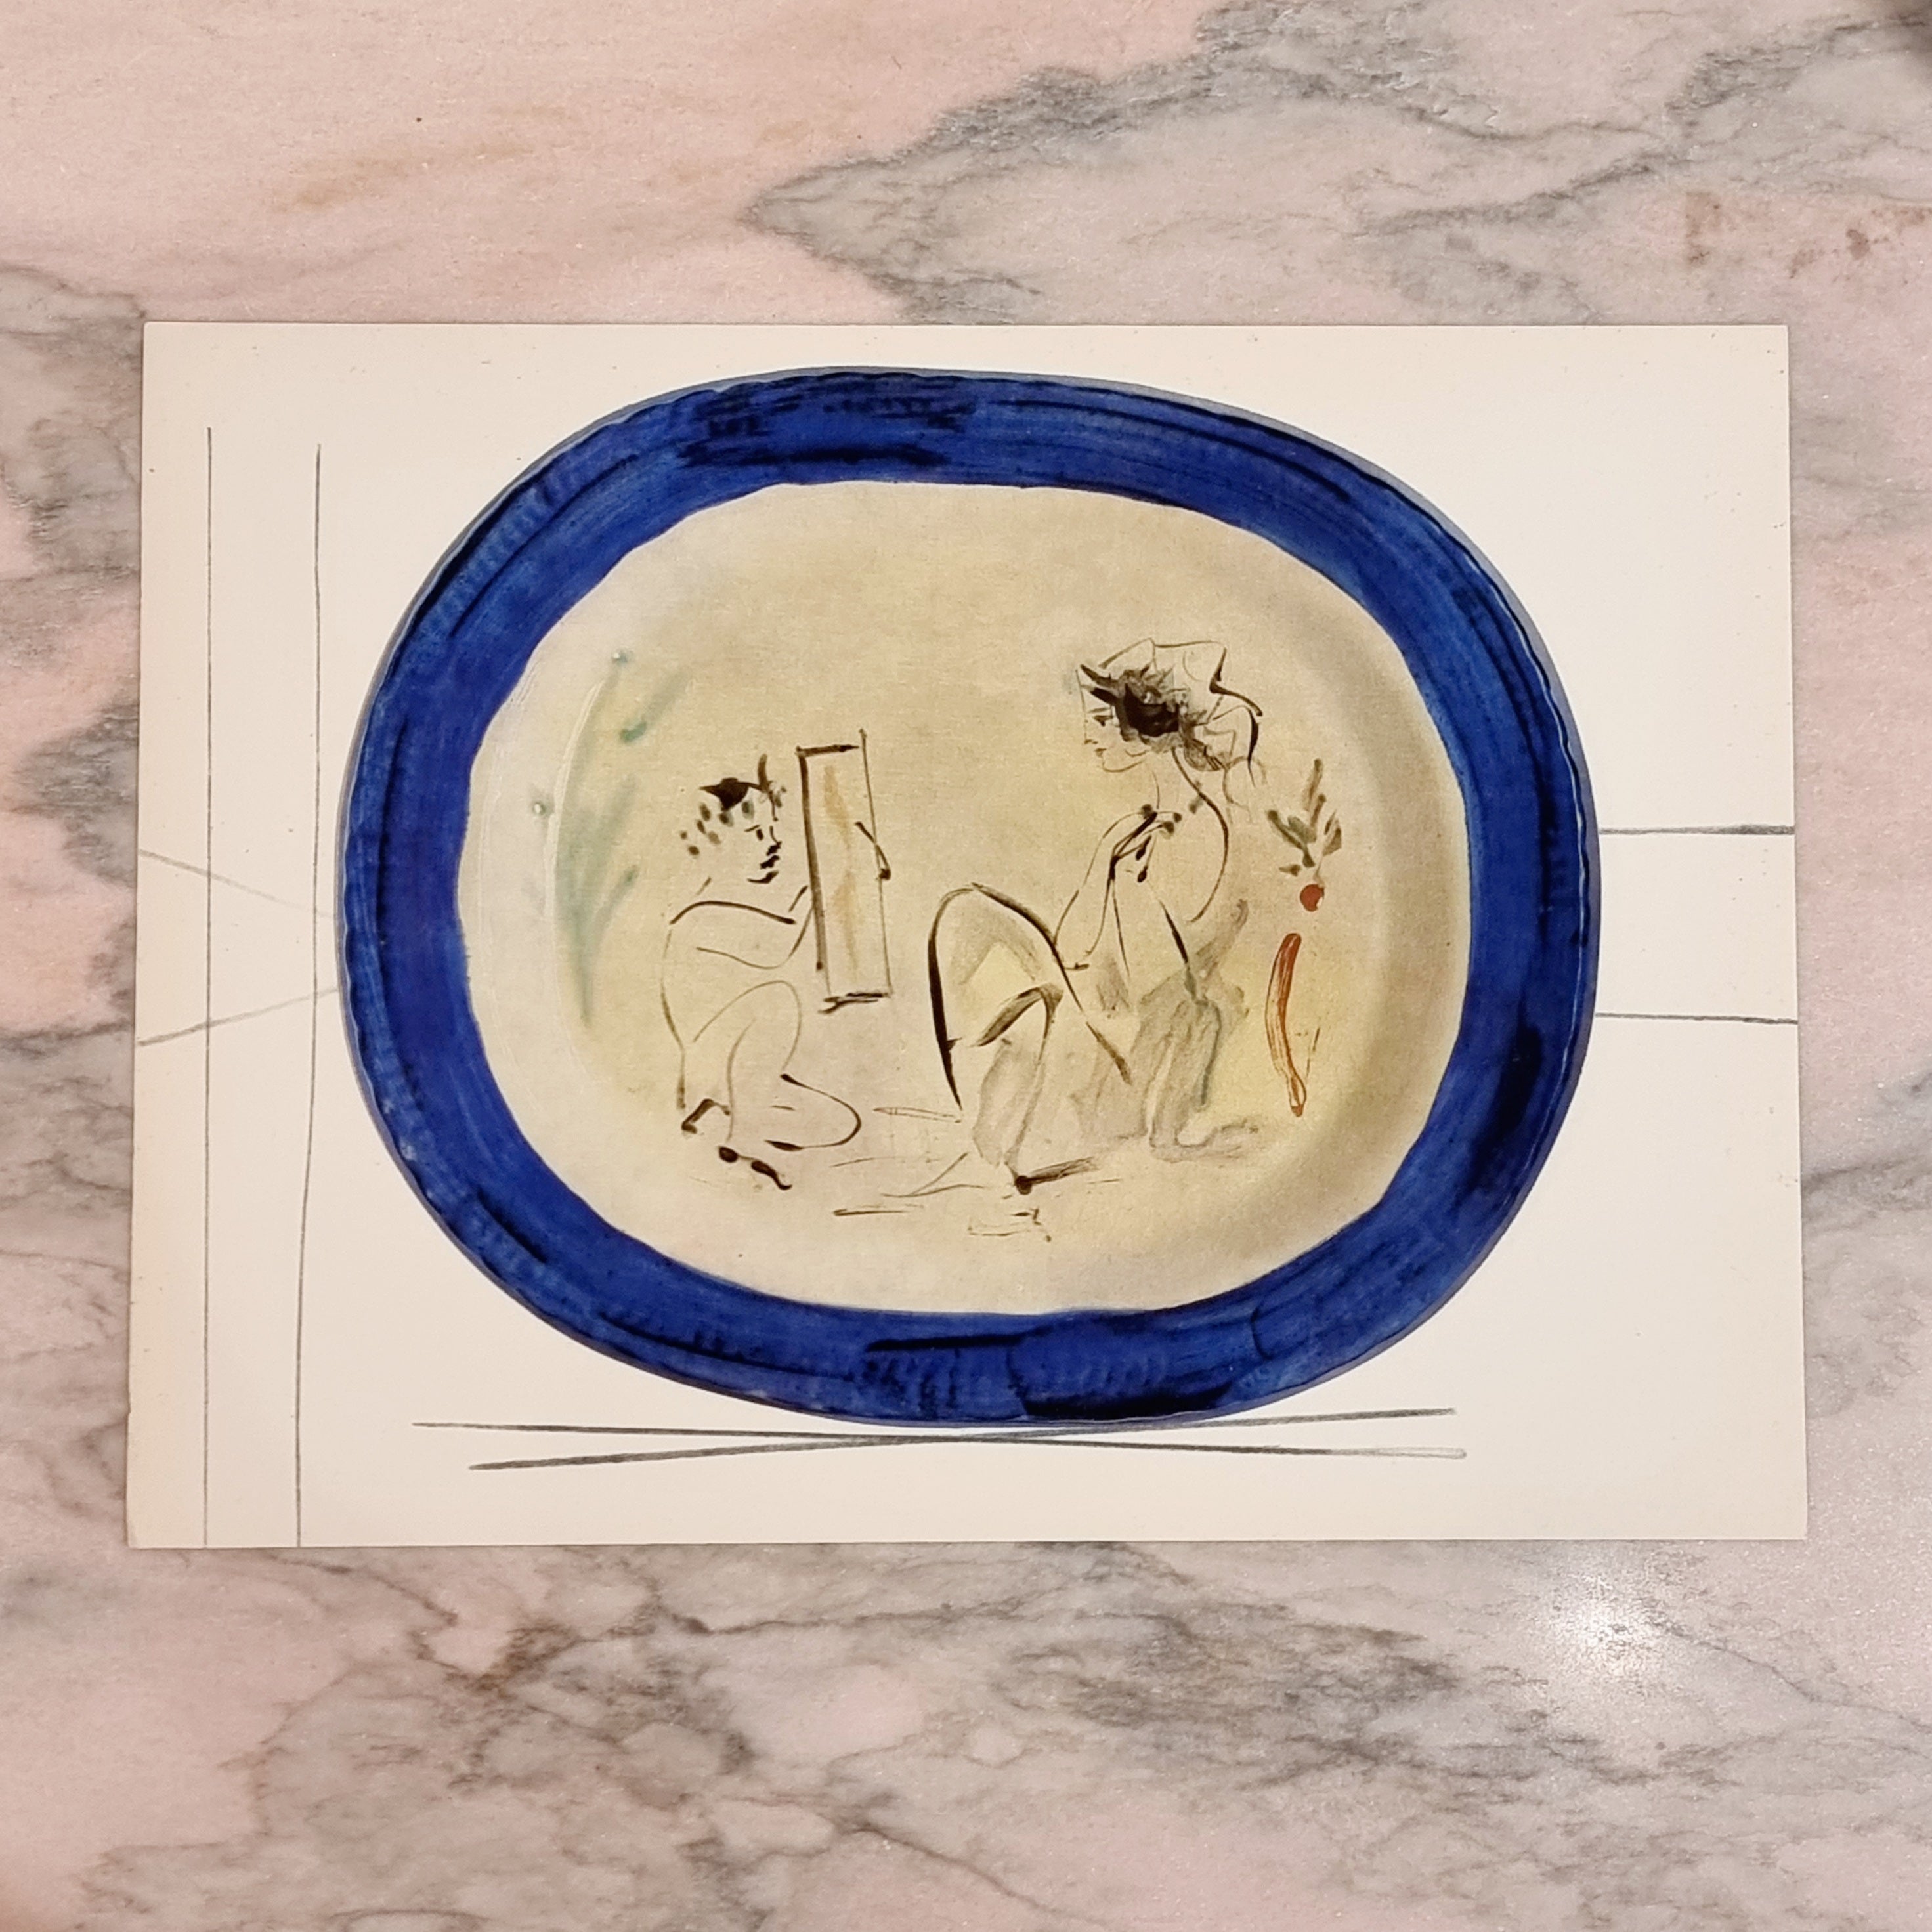 An exquisite shiny polychrome print of Picasso Vallauris ceramic plate depicting a painter with muse. The color print is attached to a thick, high quality paper with decorative lines. 

The print is originally from a Limited Edition Art Folio